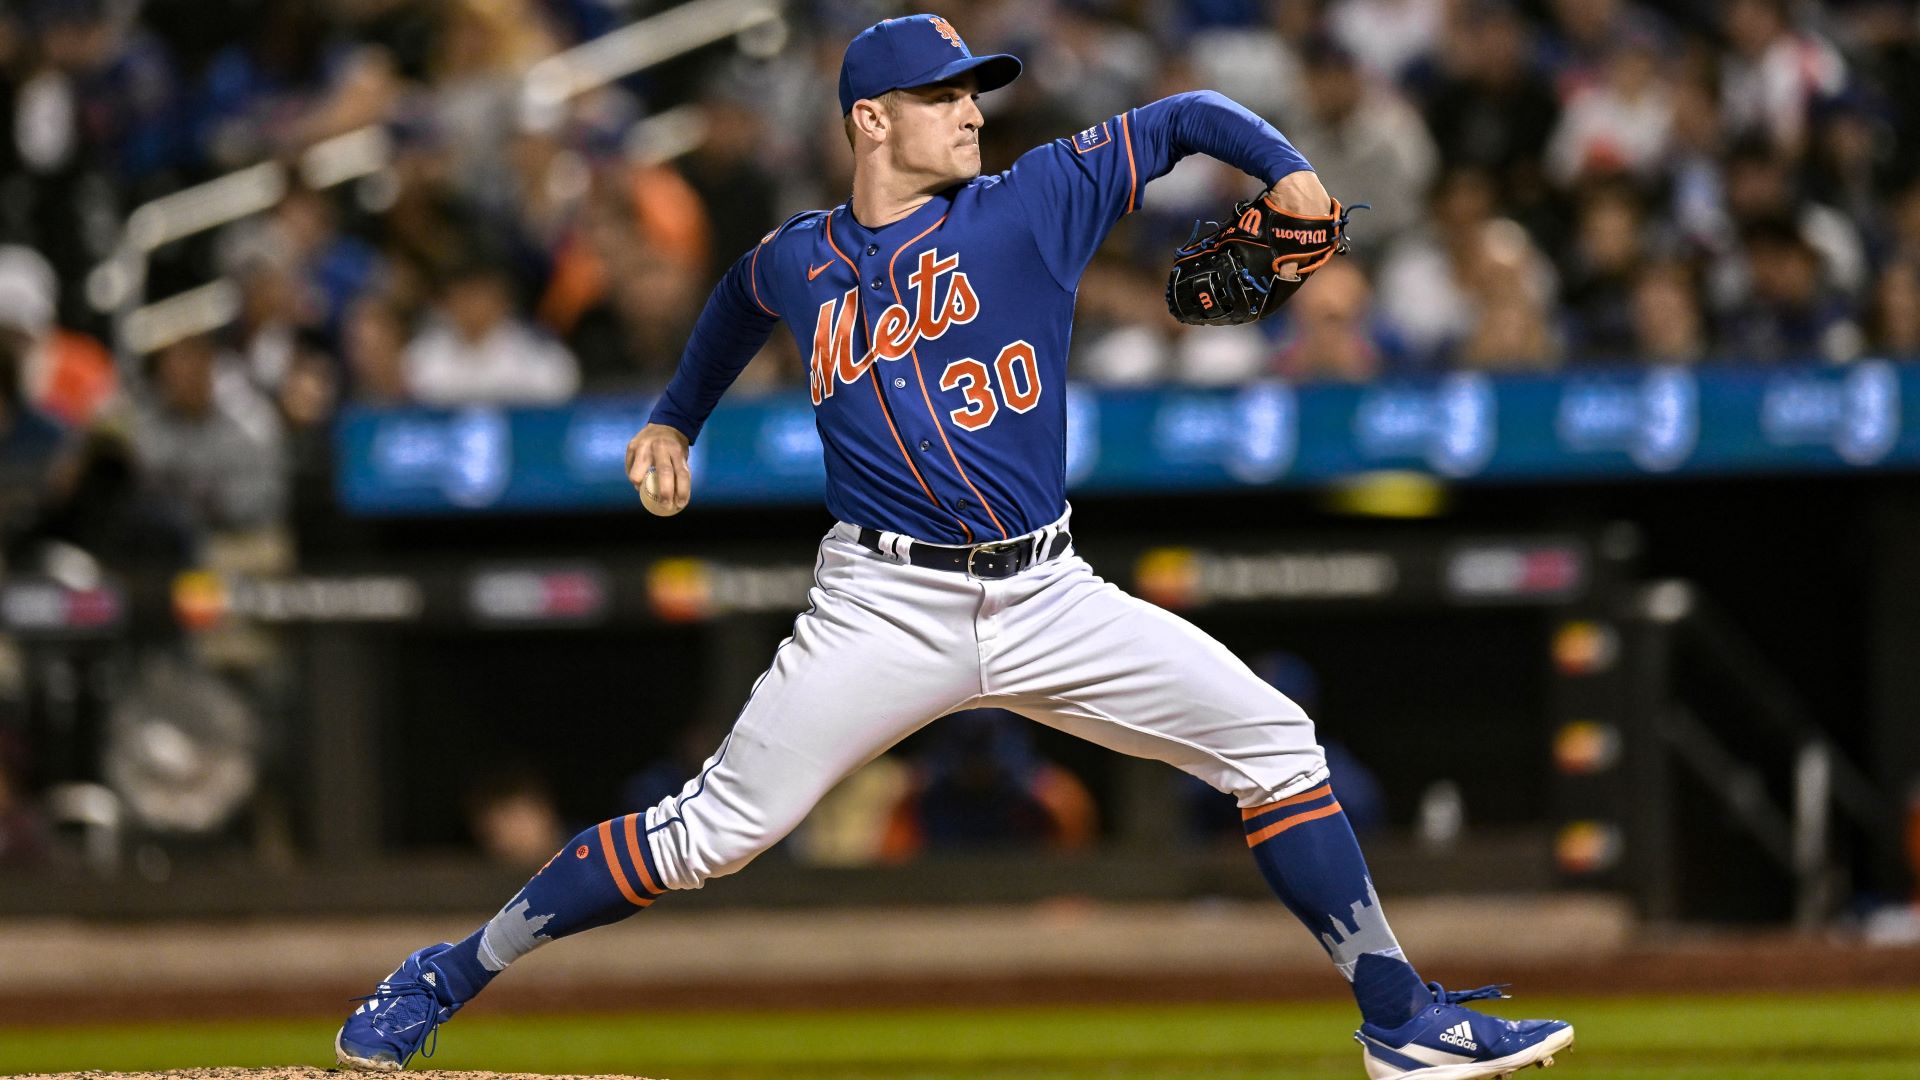 MLB Rumors: 3 New York Mets on thin ice after trade deadline fire sale